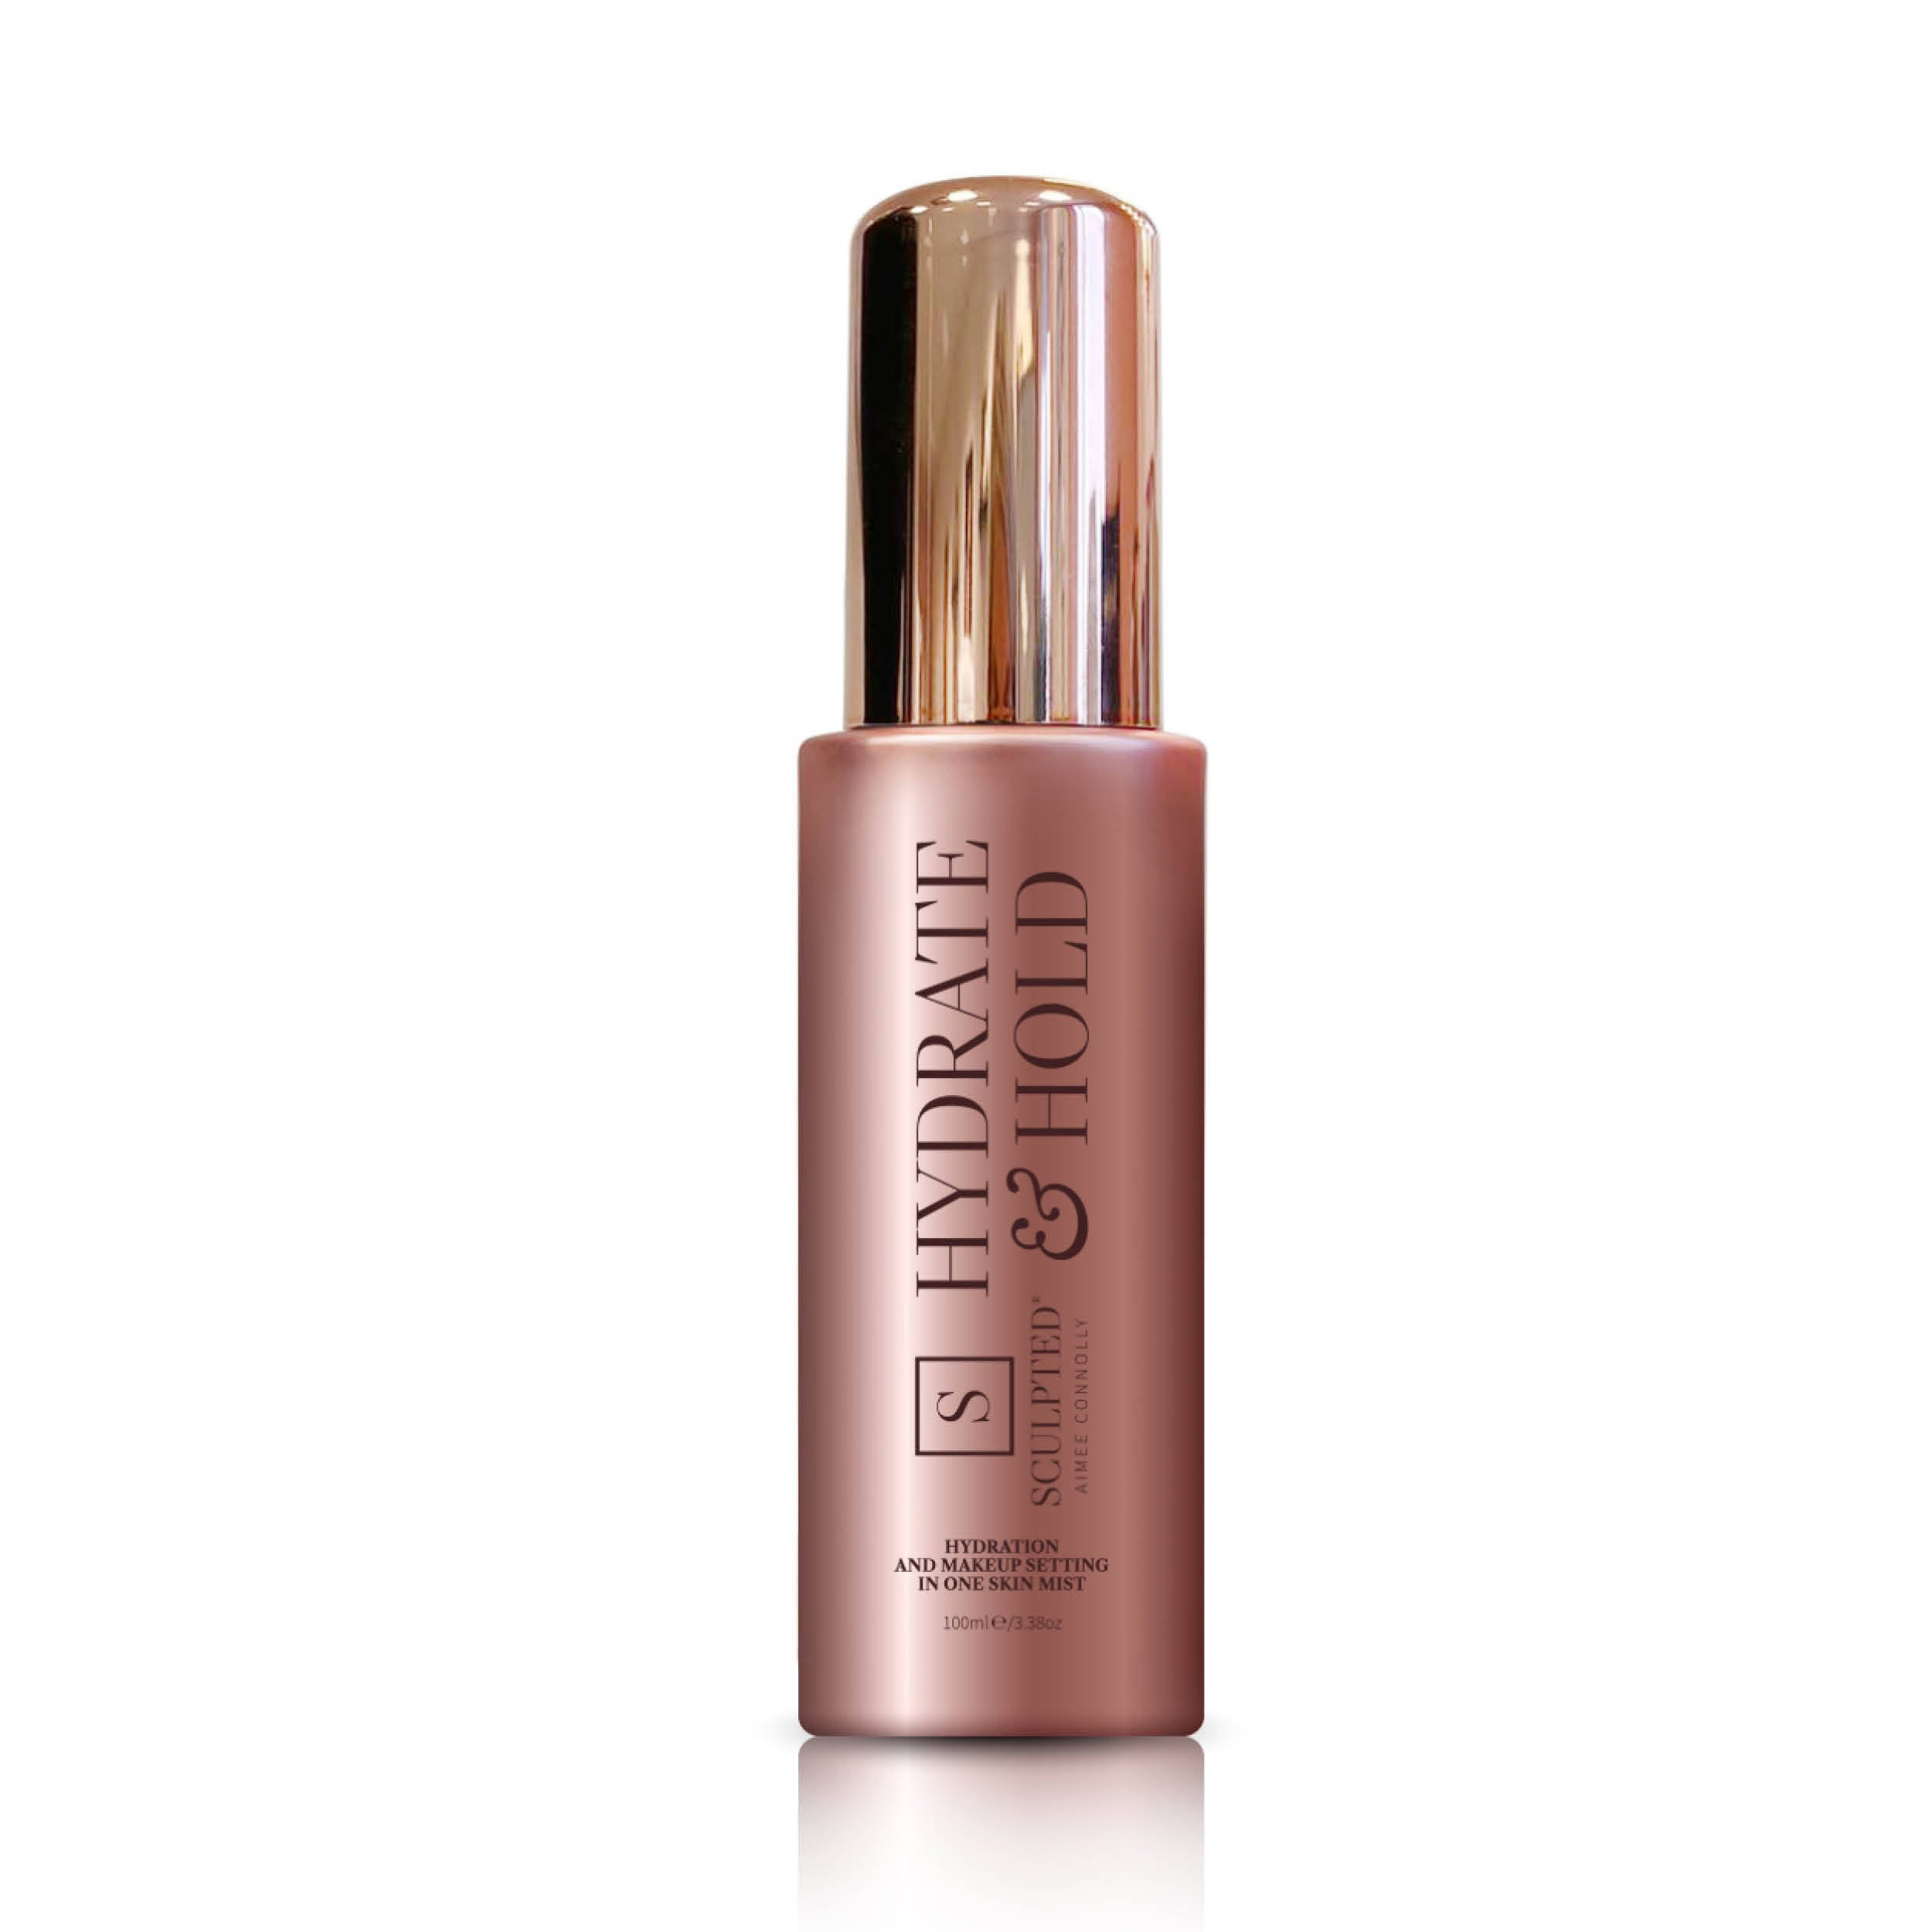 Sculpted by AIMEE Hydrate & Hold Setting Spray 100ml